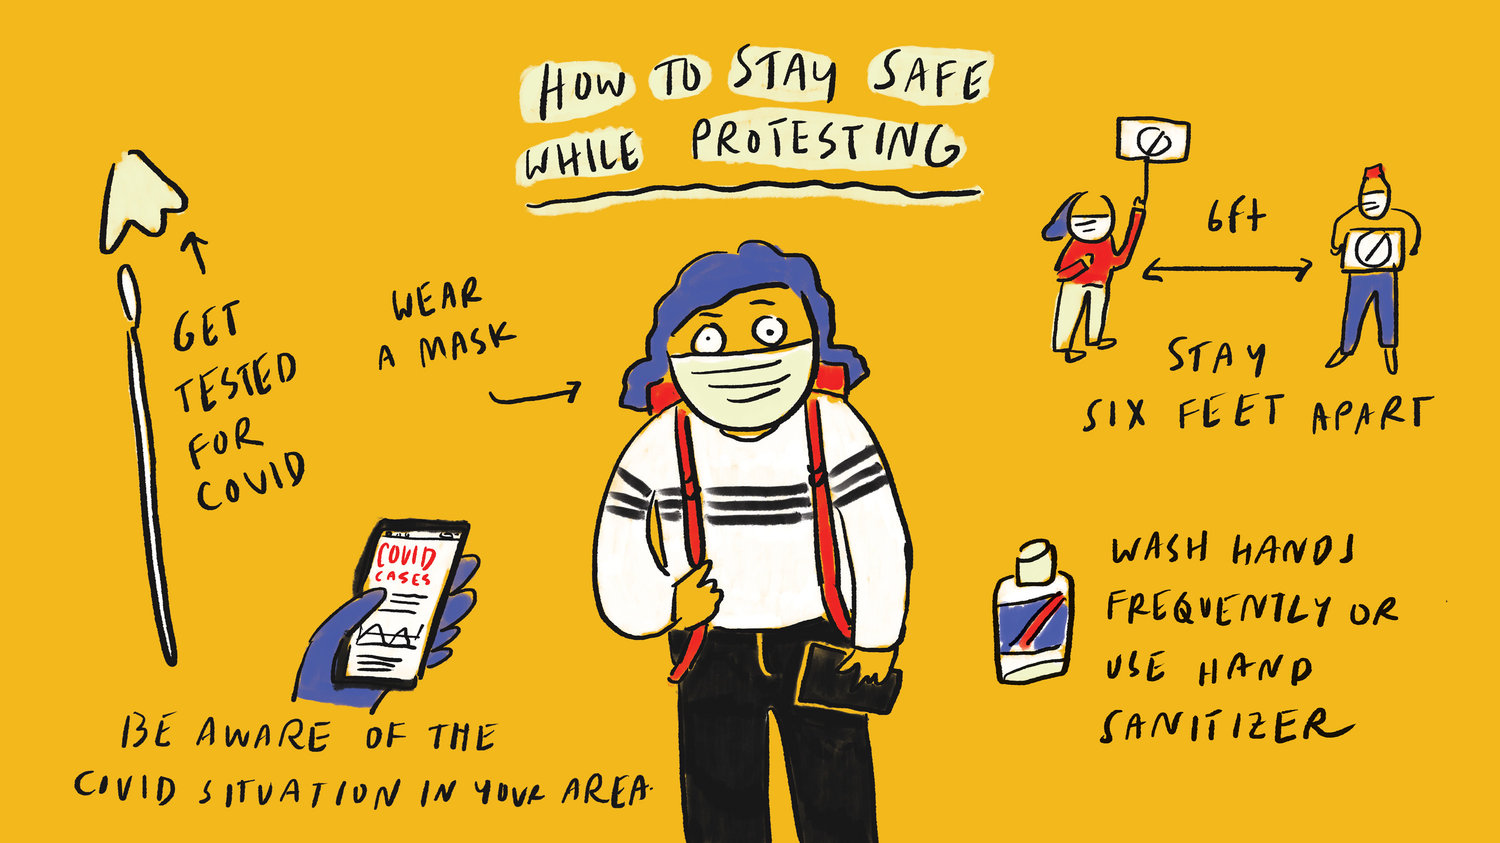 Coronavirus FAQs: How To Stay Safe While Protesting, When To Go Out After Recovery